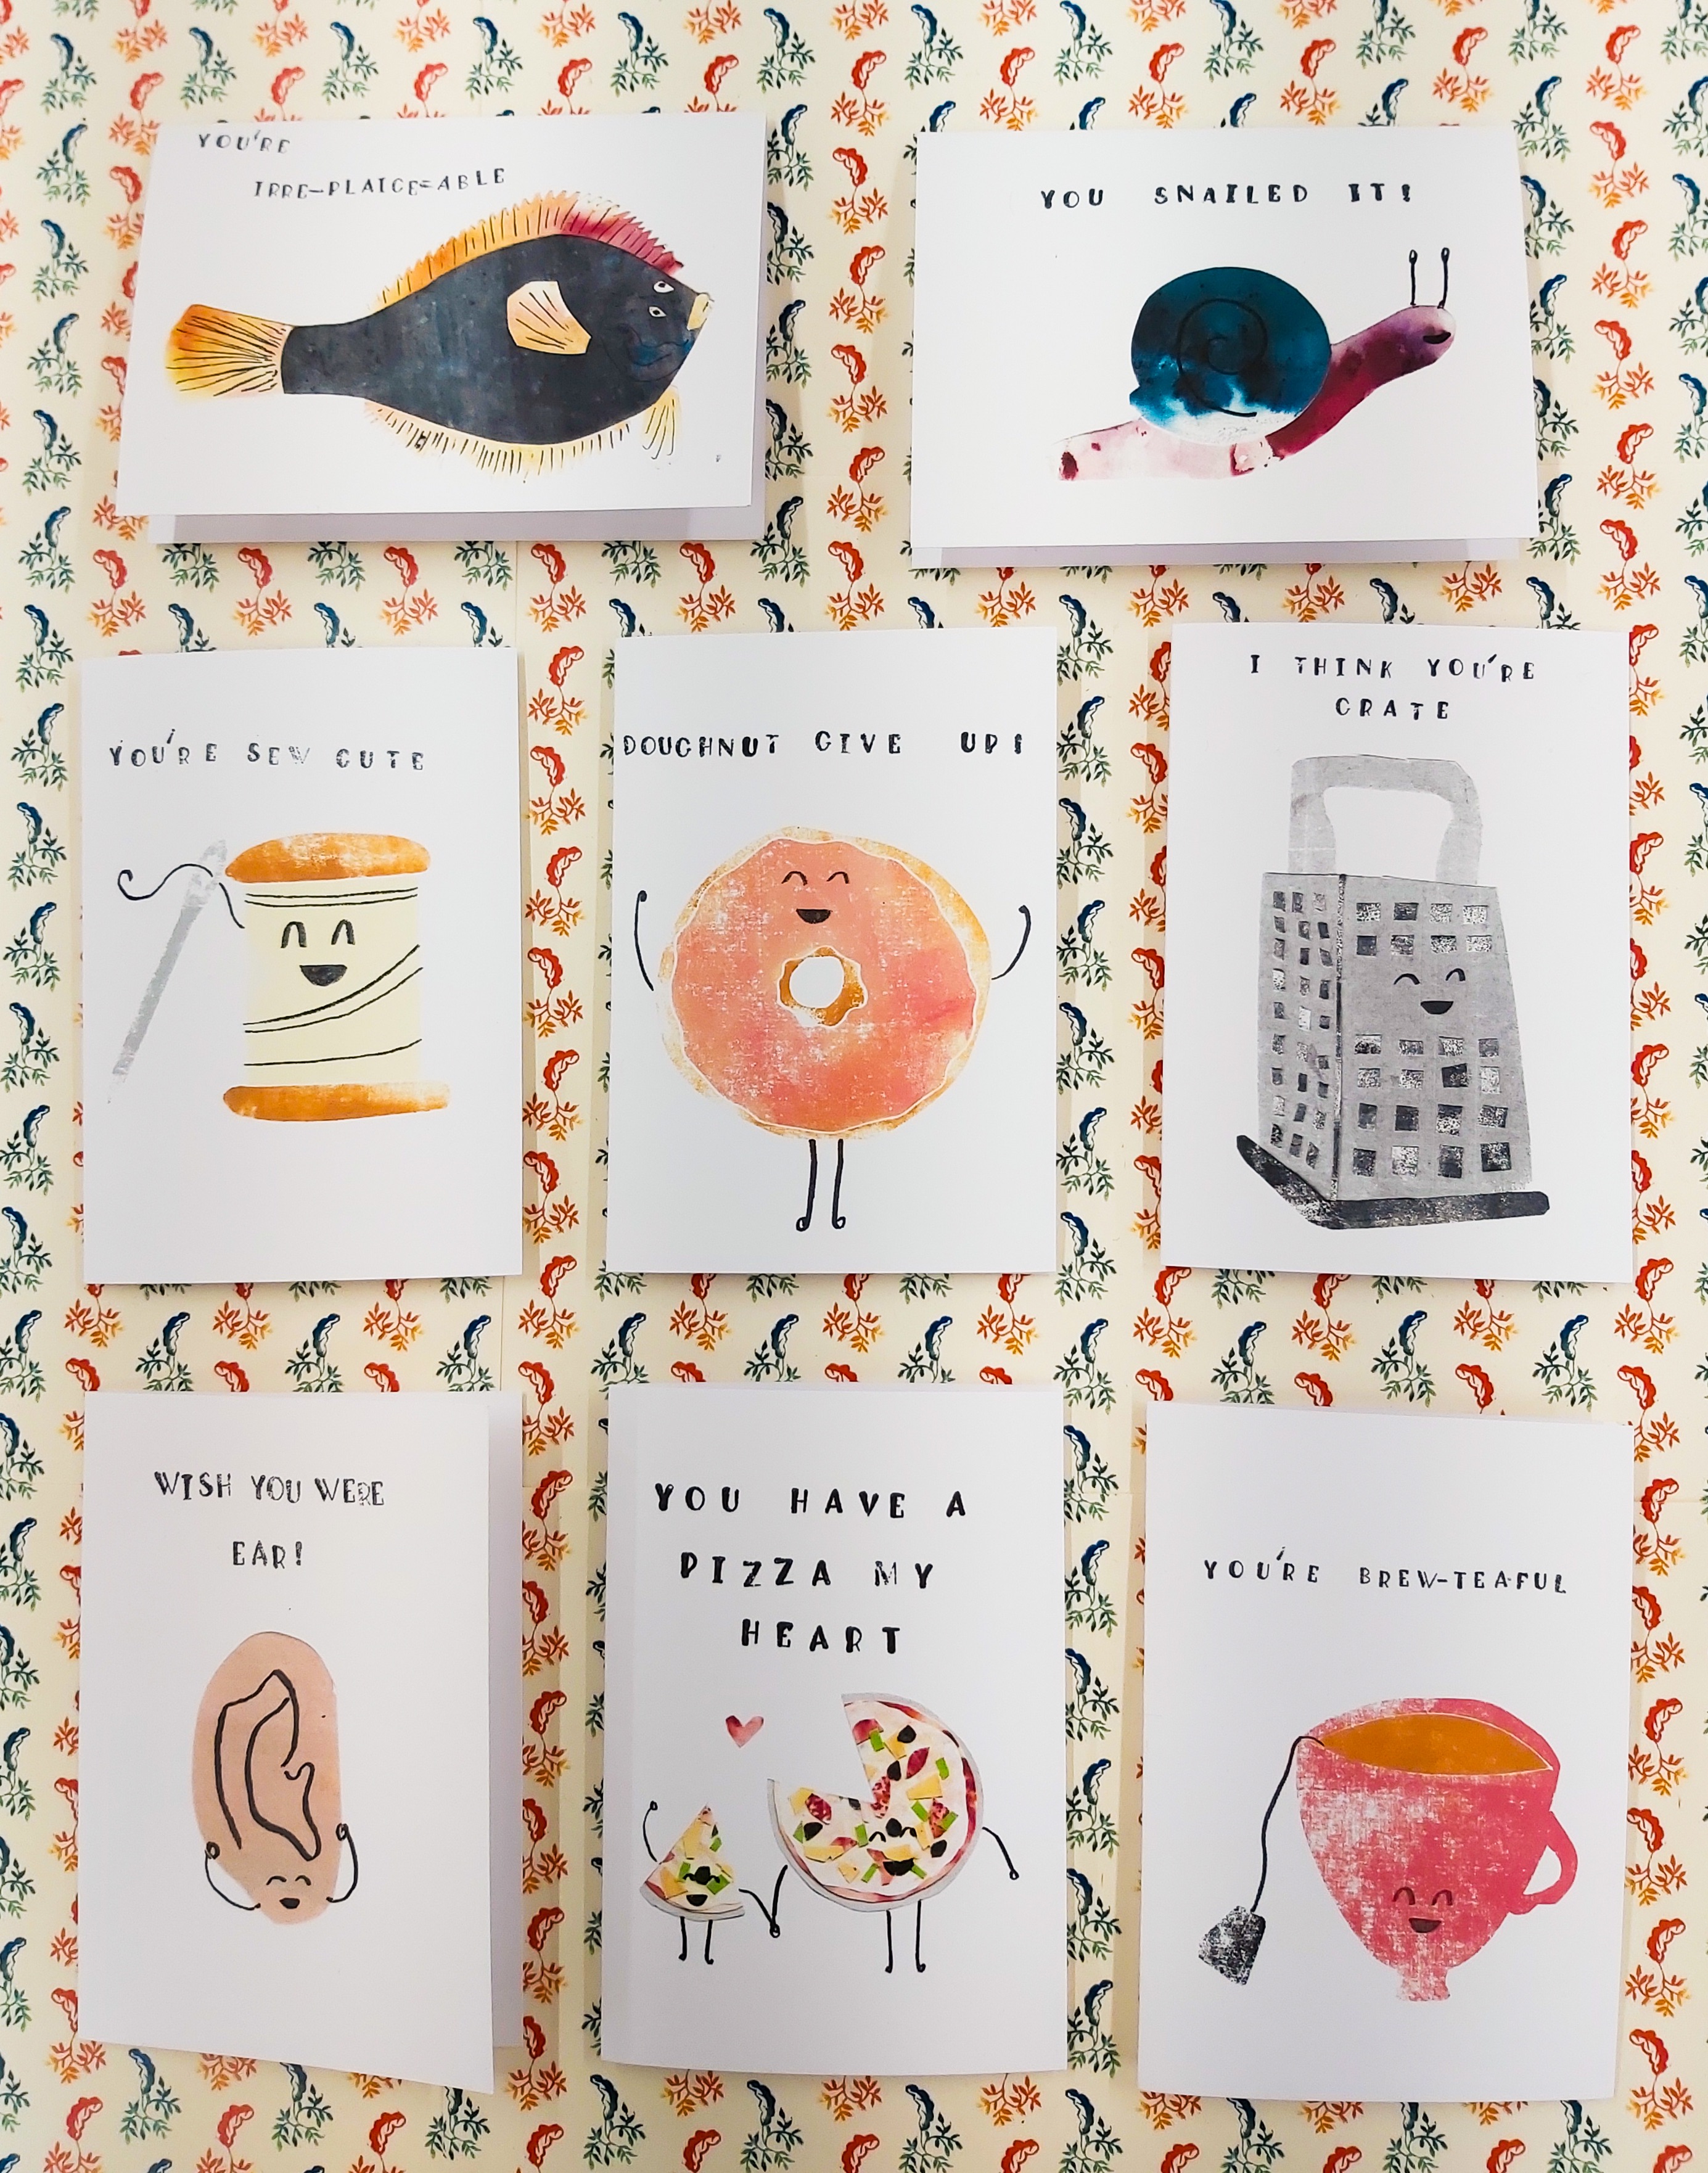 BA Illustration work by Natalie Martinez showing a selection of punny greeting cards in a cut-paper collage style.